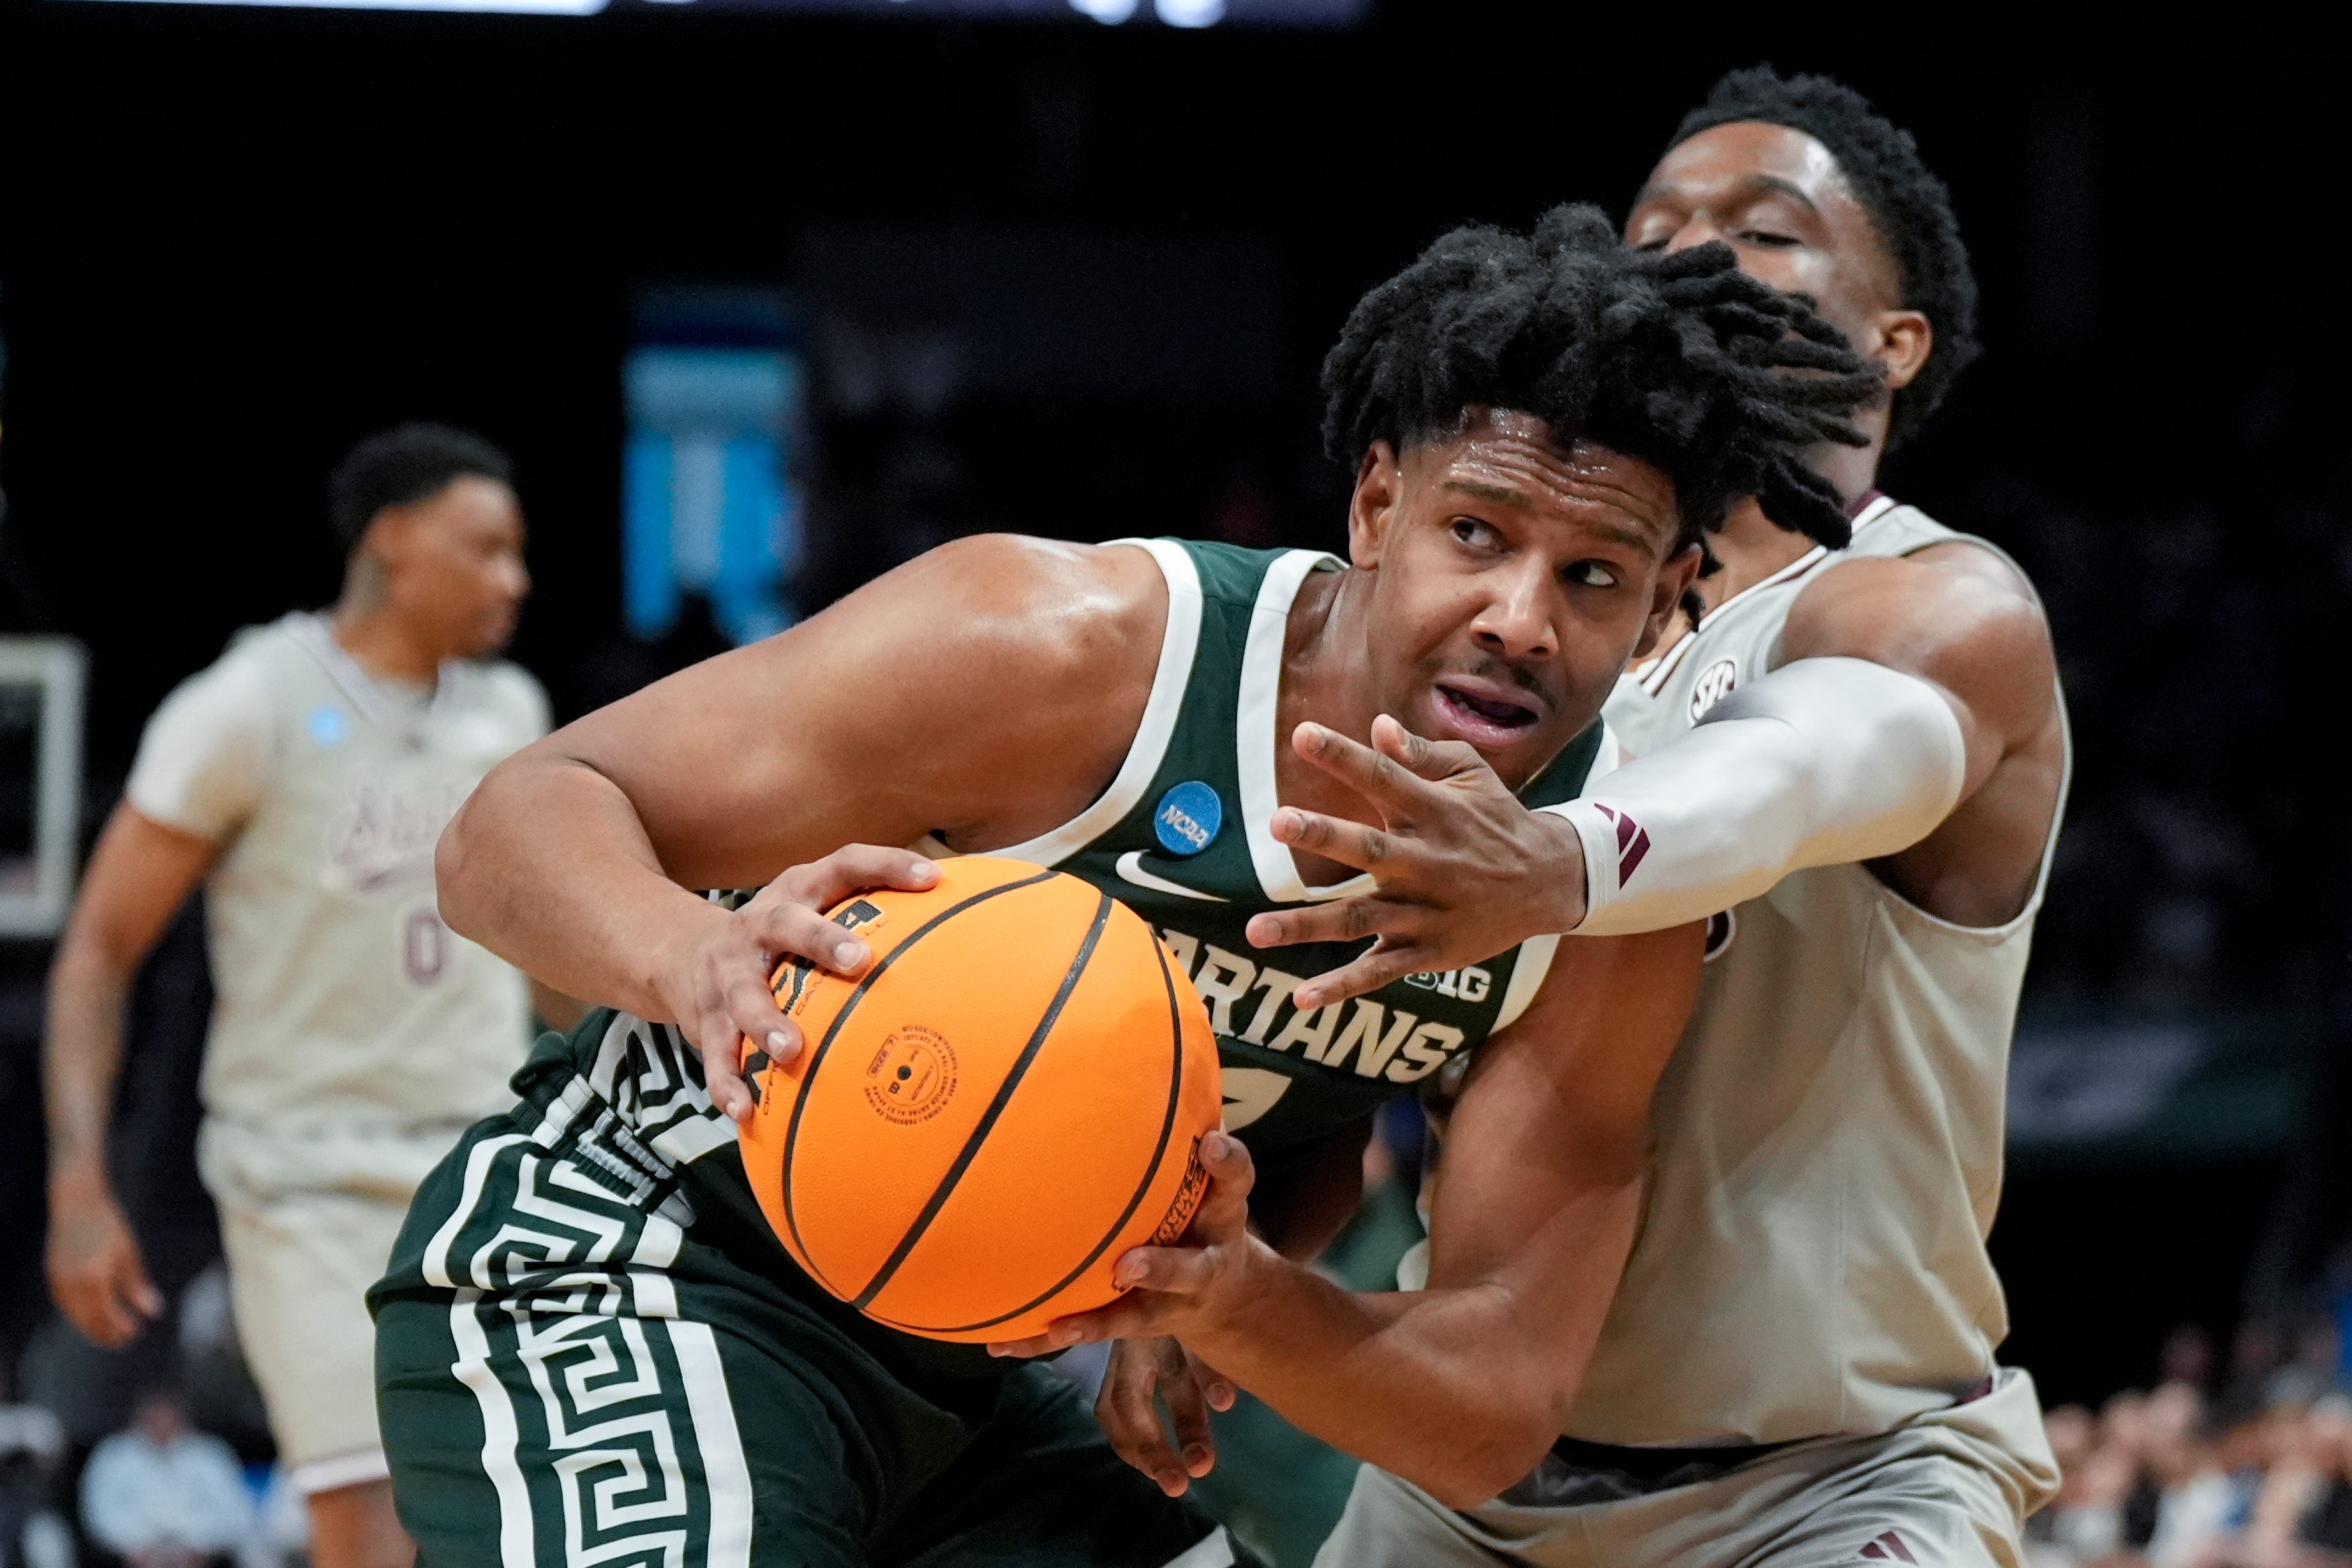 Michigan State guard A.J. Hoggard drives to the basket past Mississippi State guard Josh Hubbard during the first half.